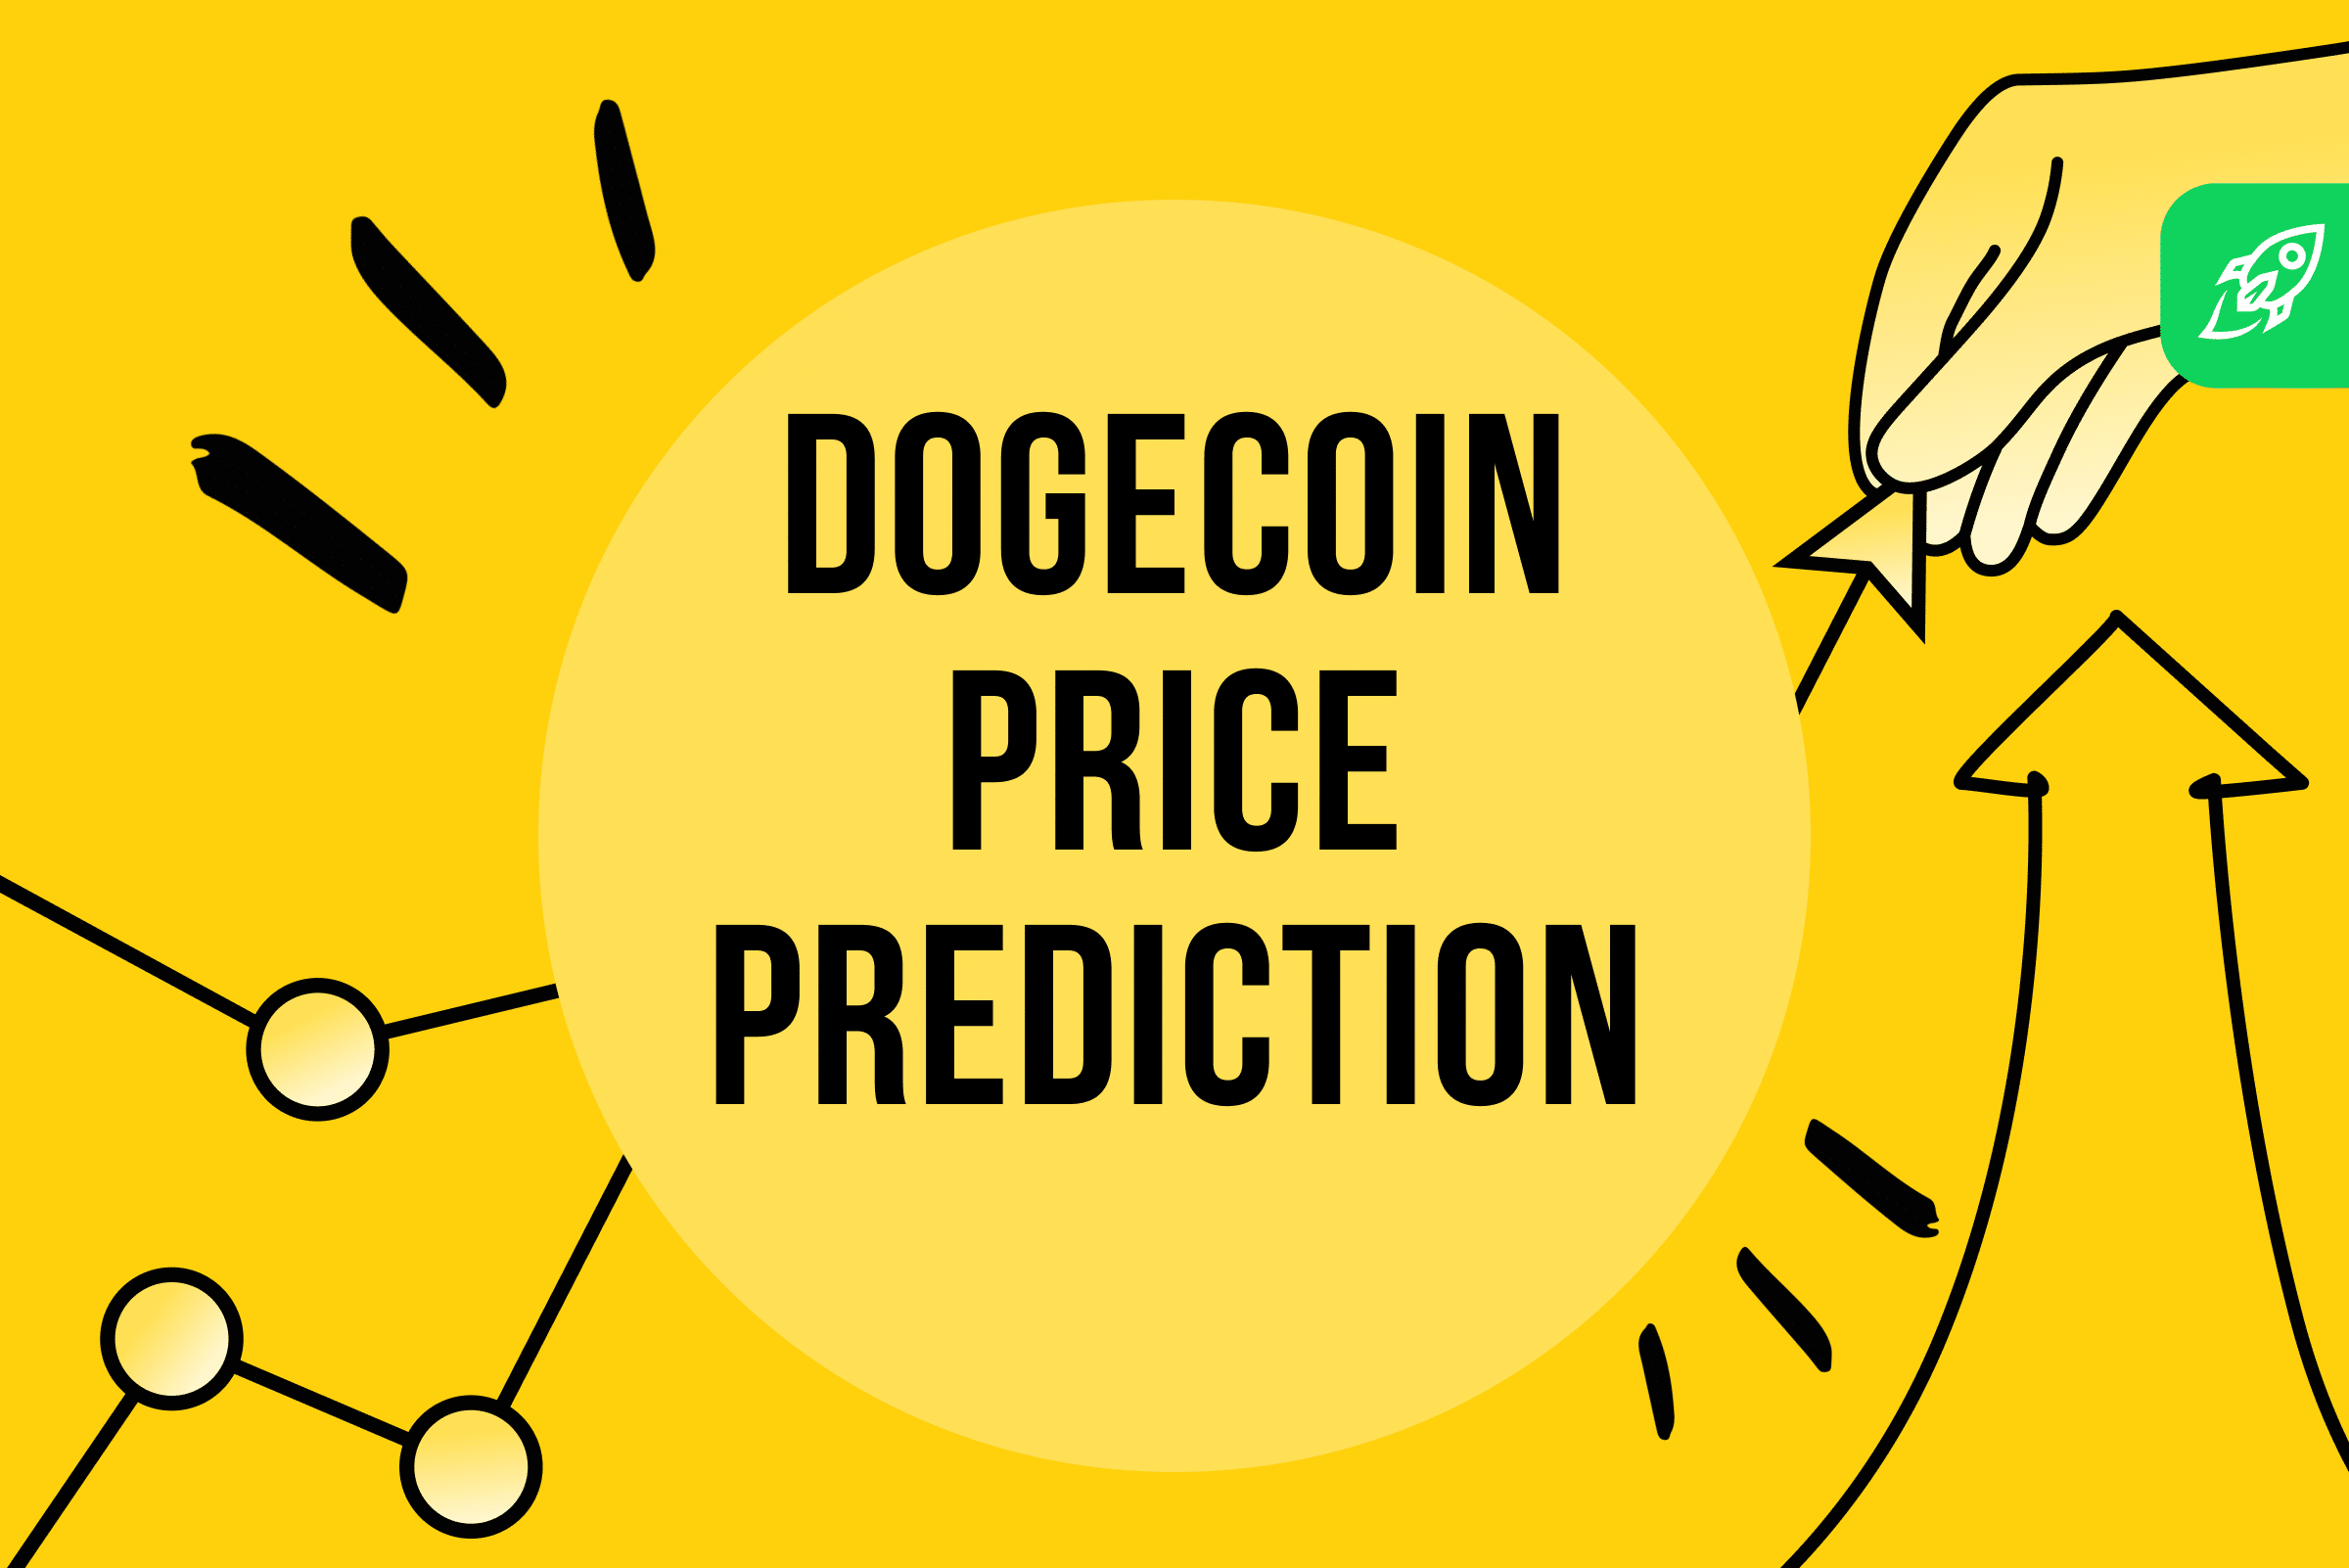 Dogecoin (DOGE) Price Prediction for Tommorow, Month, Year